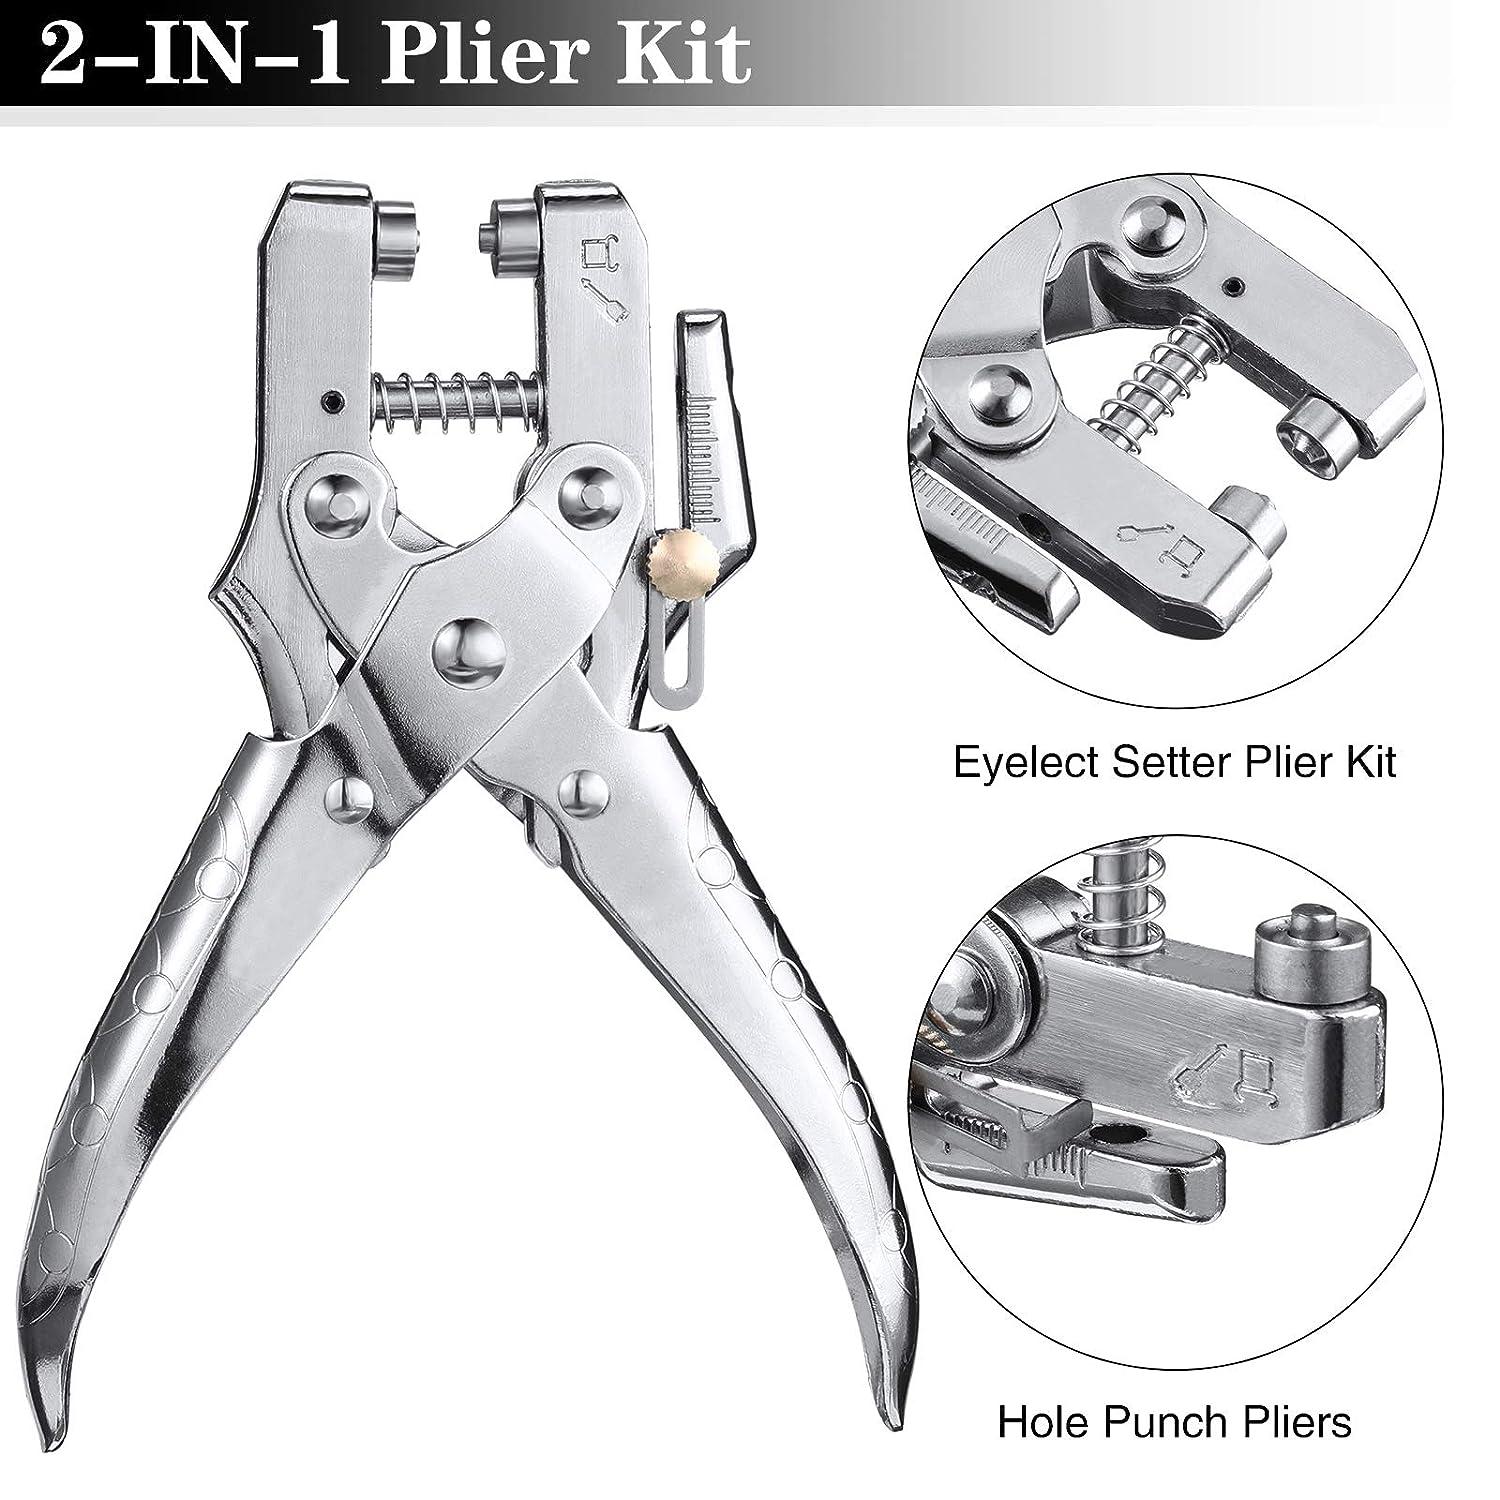 Grommet Tool Kit Eyelet Plier Eyelet Hole Punch Pliers Tool Kit for Fabric  Paper